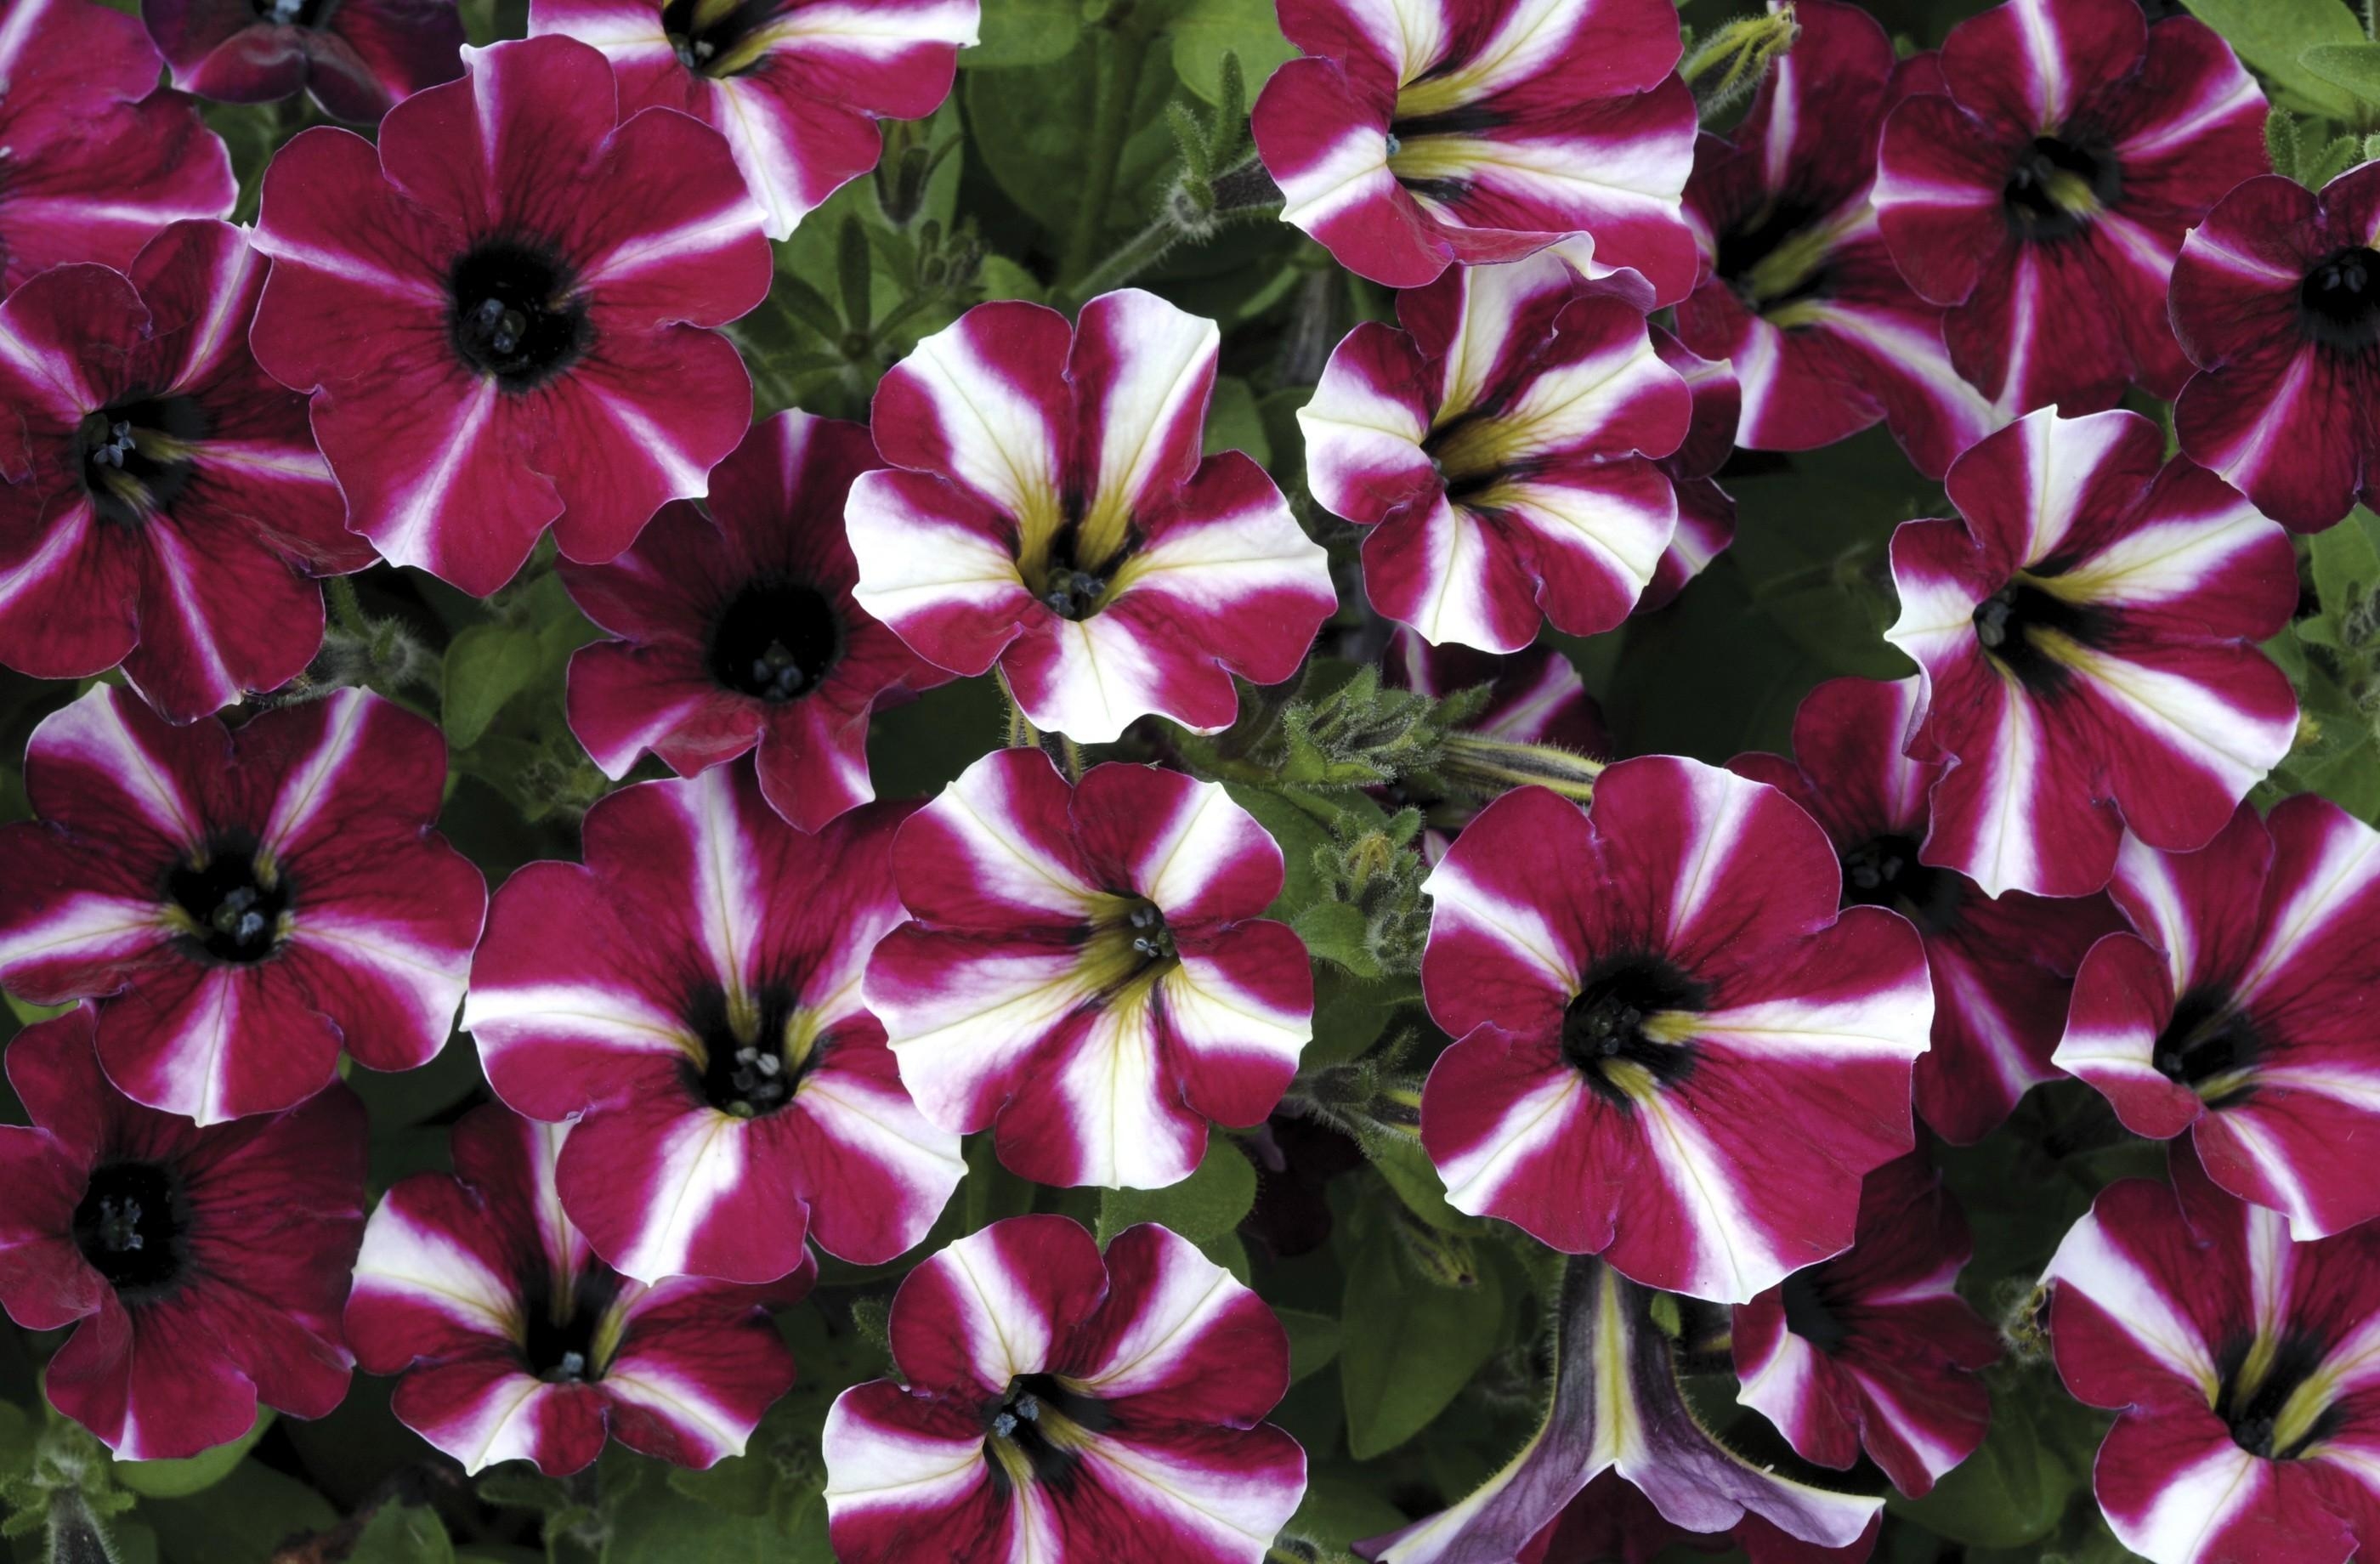 Petunia wallpaper for desktop, download free Petunia picture and background for PC